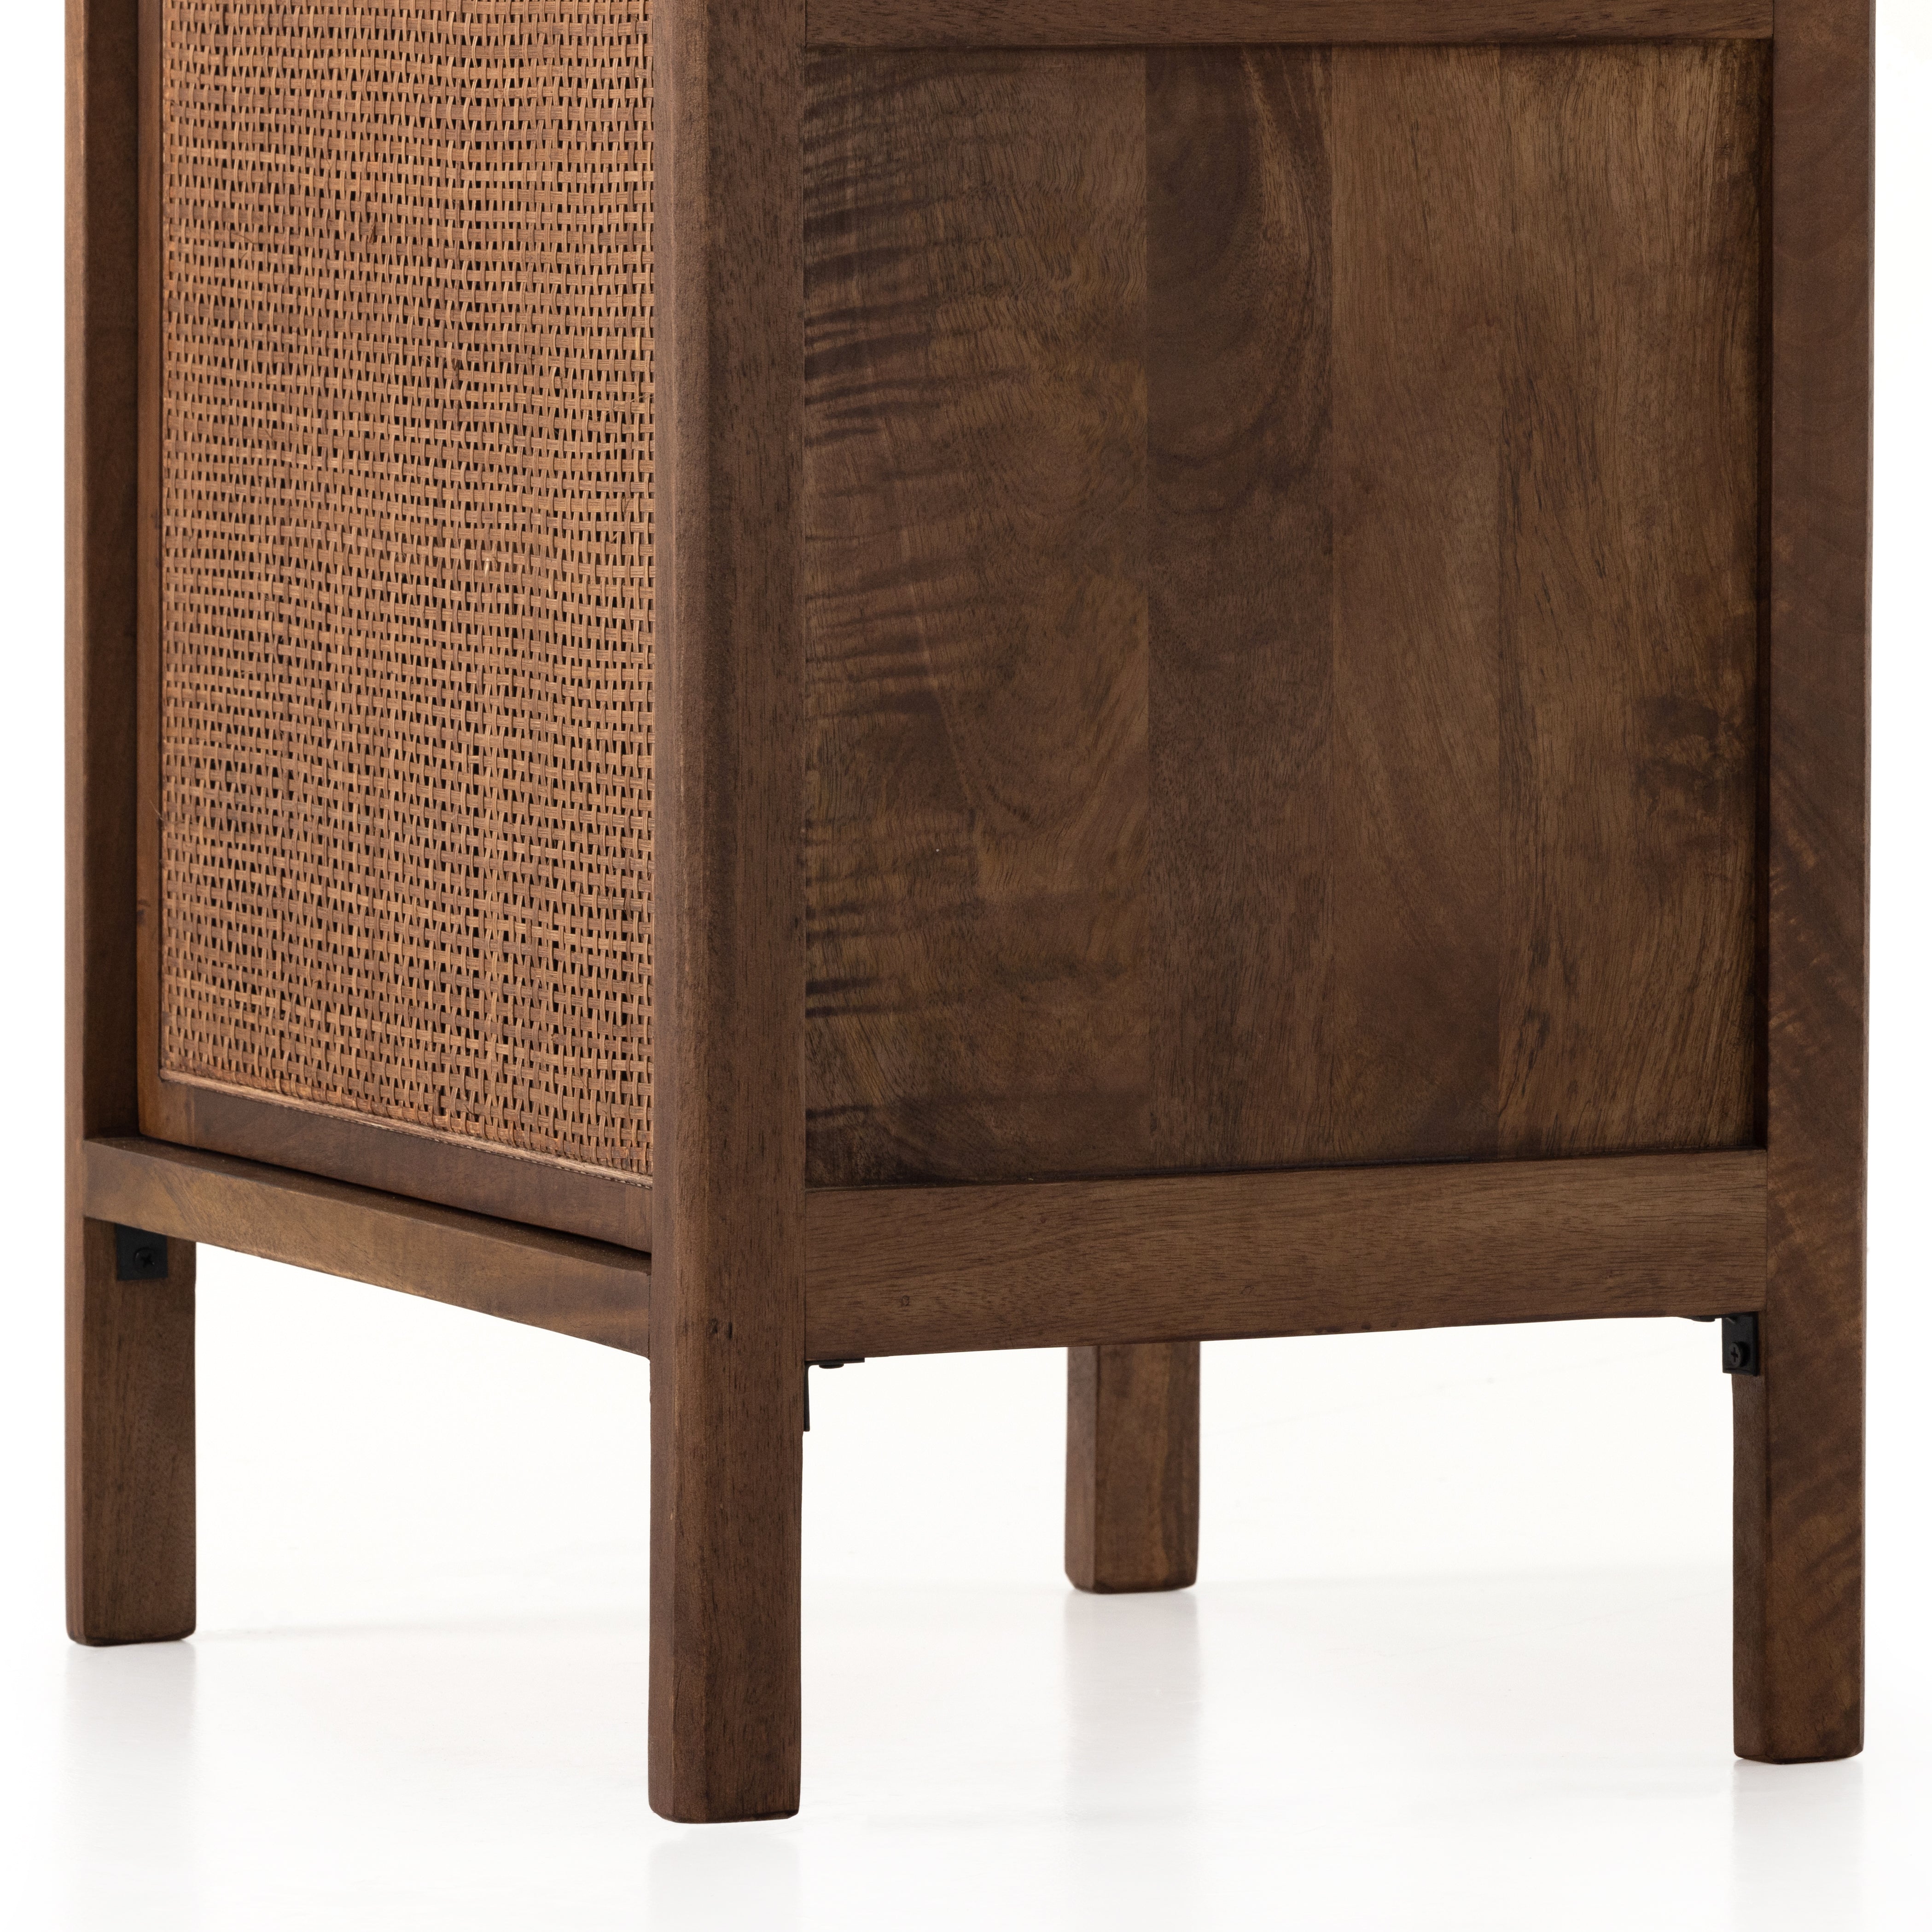 Brown-washed mango encases inset woven cane, for a light, textural look with monochromatic vibes. Removable interior shelf offers clever convenience. Option to pair with matching left nightstand. Amethyst Home provides interior design, new construction, custom furniture, and area rugs in the Winter Garden metro area.